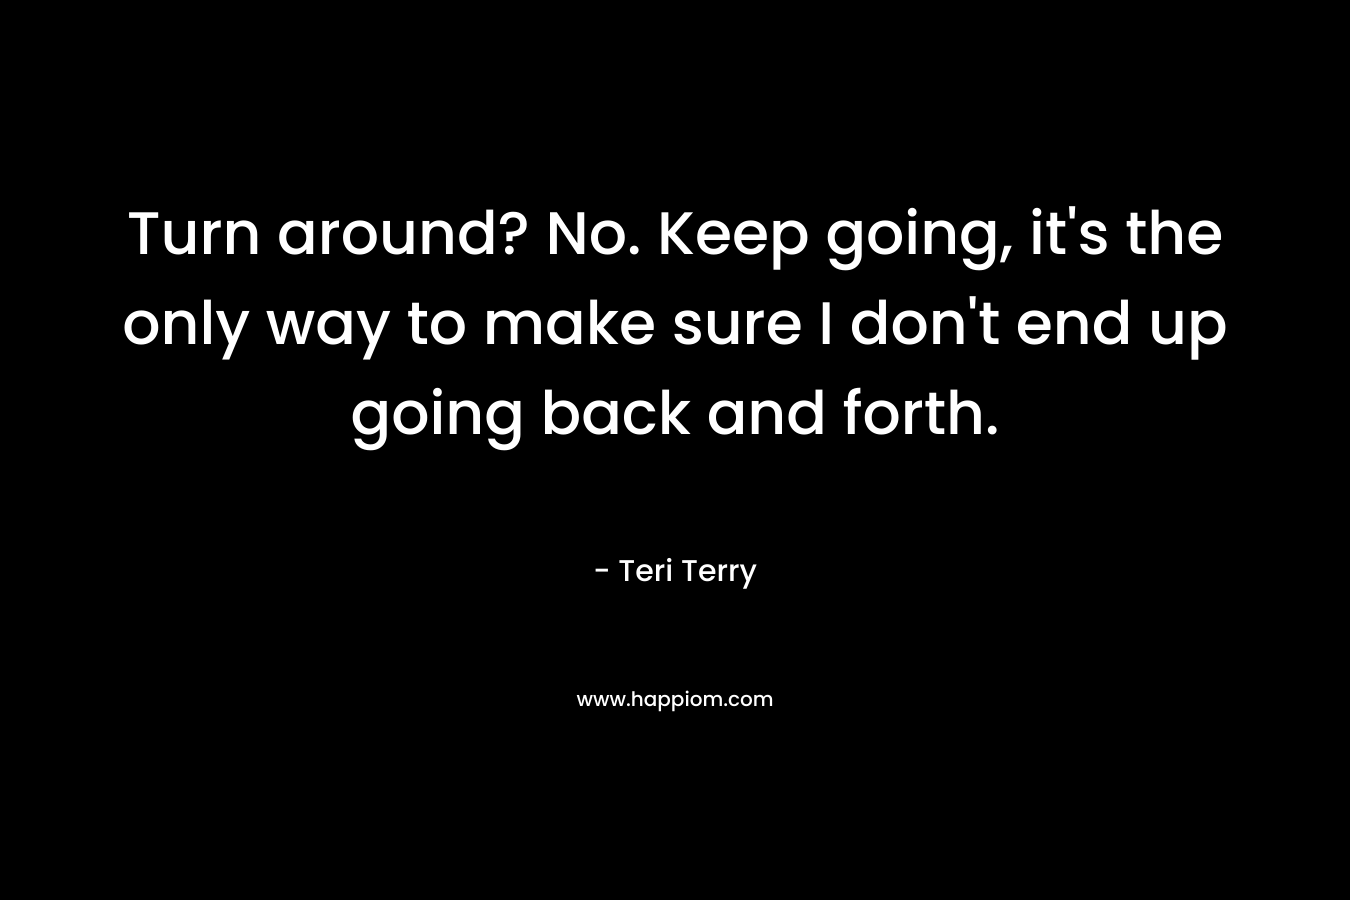 Turn around? No. Keep going, it’s the only way to make sure I don’t end up going back and forth. – Teri Terry